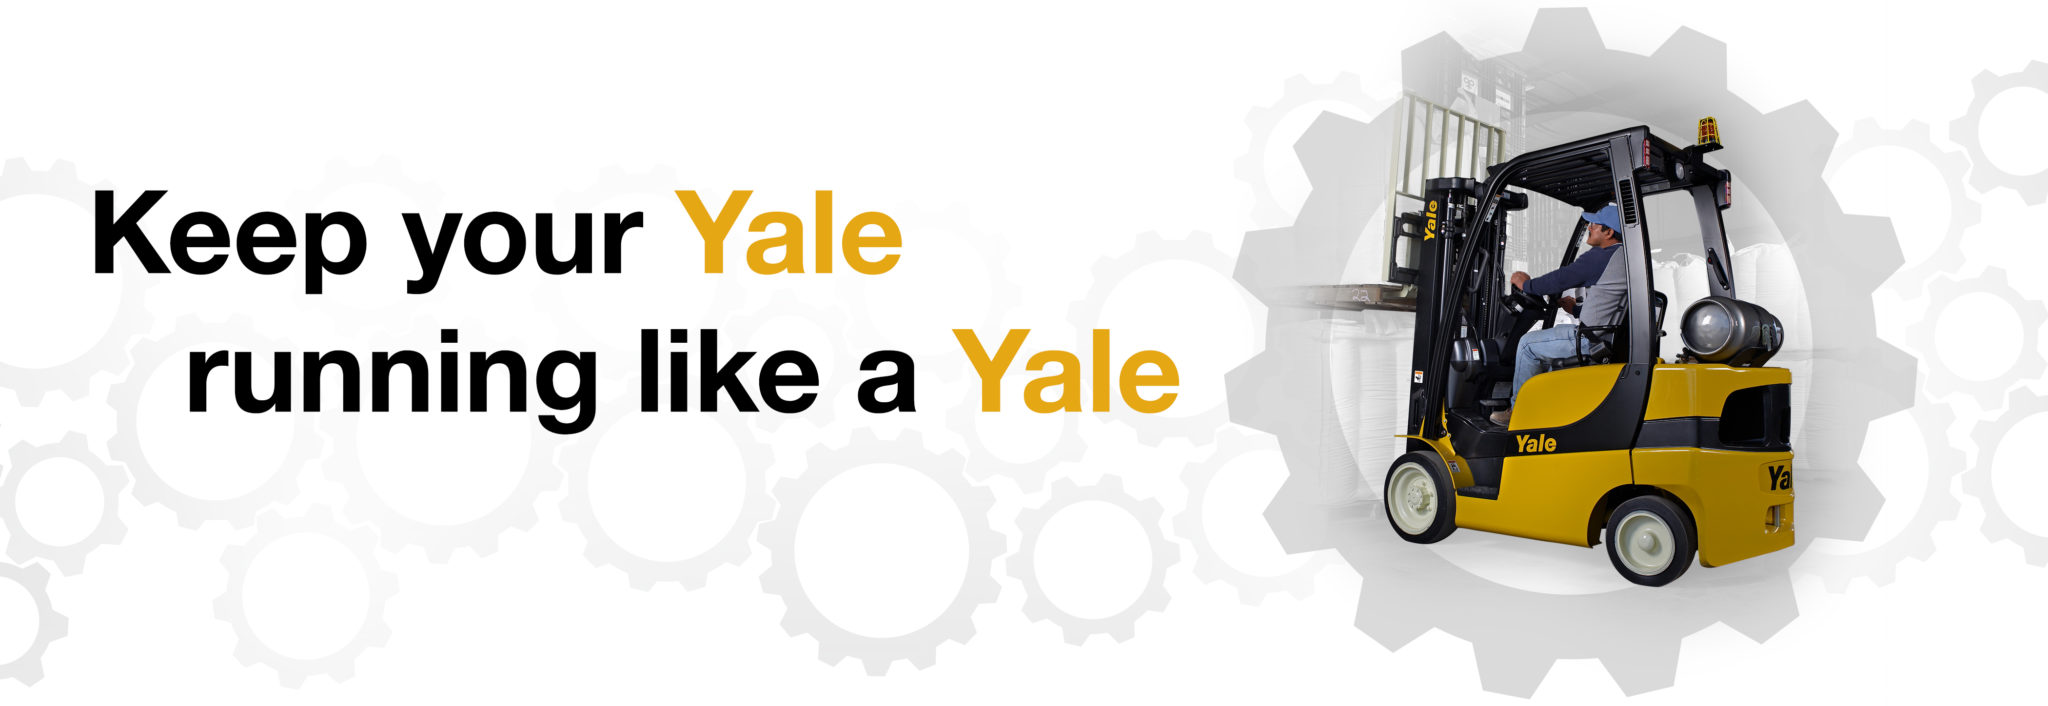 yale-parts-landing-page-header@2x